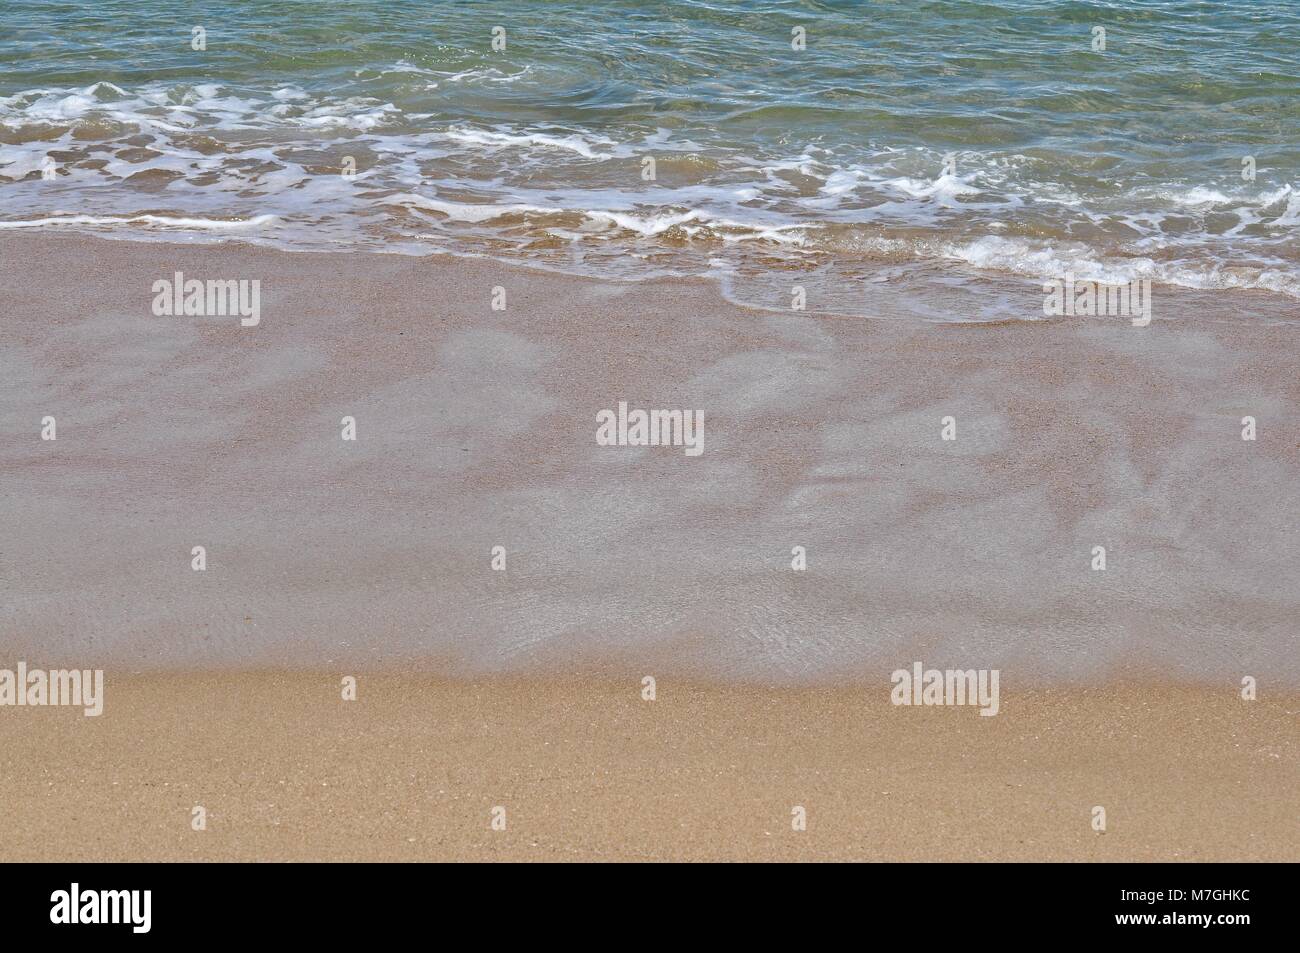 Small waves breaking at the shoreline with large area of wet sand. Stock Photo